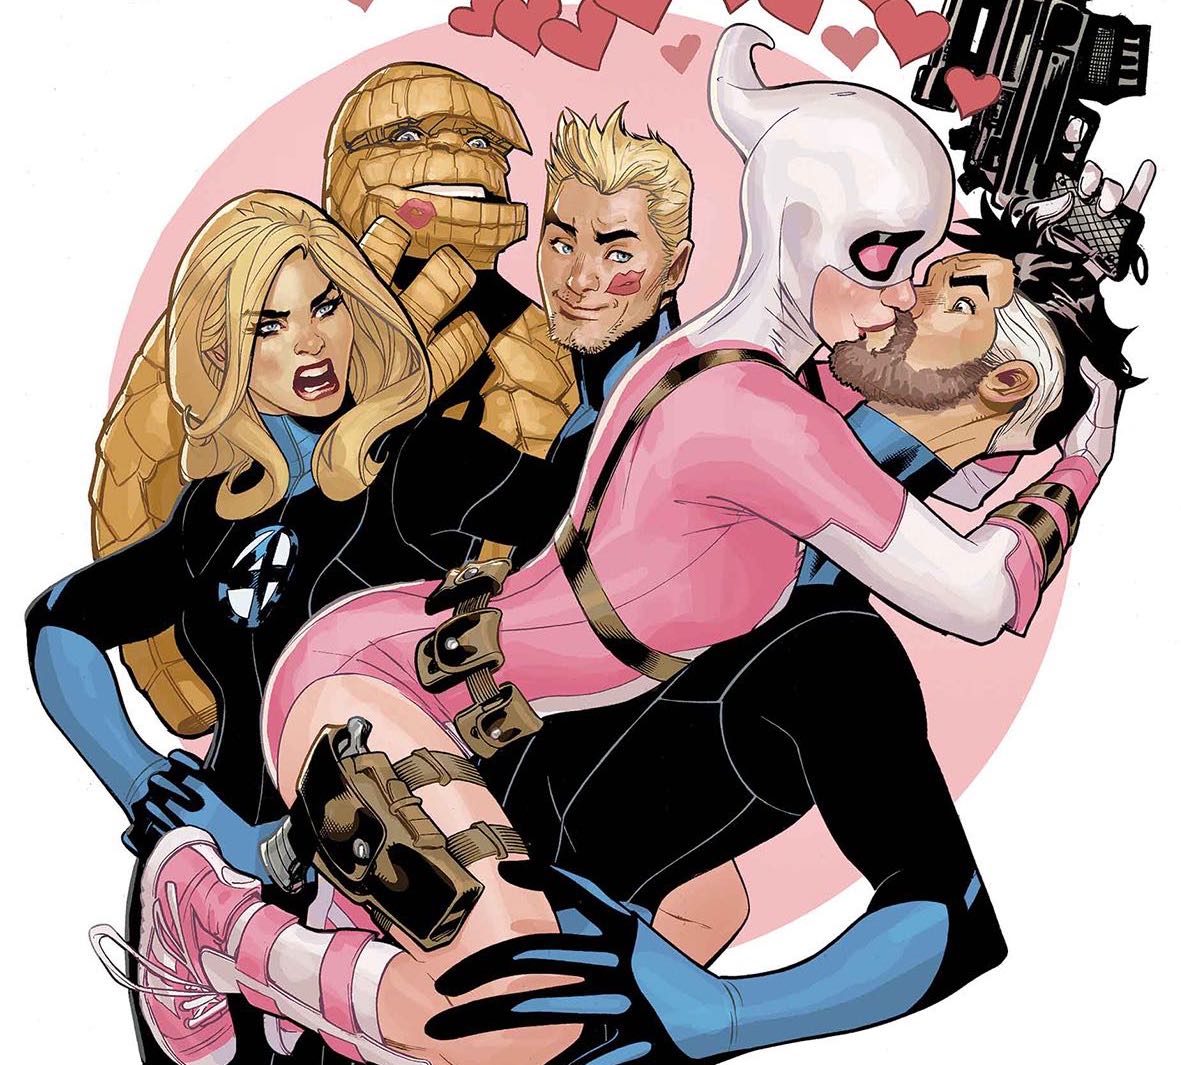 Gwenpool Strikes Back! #2 Review